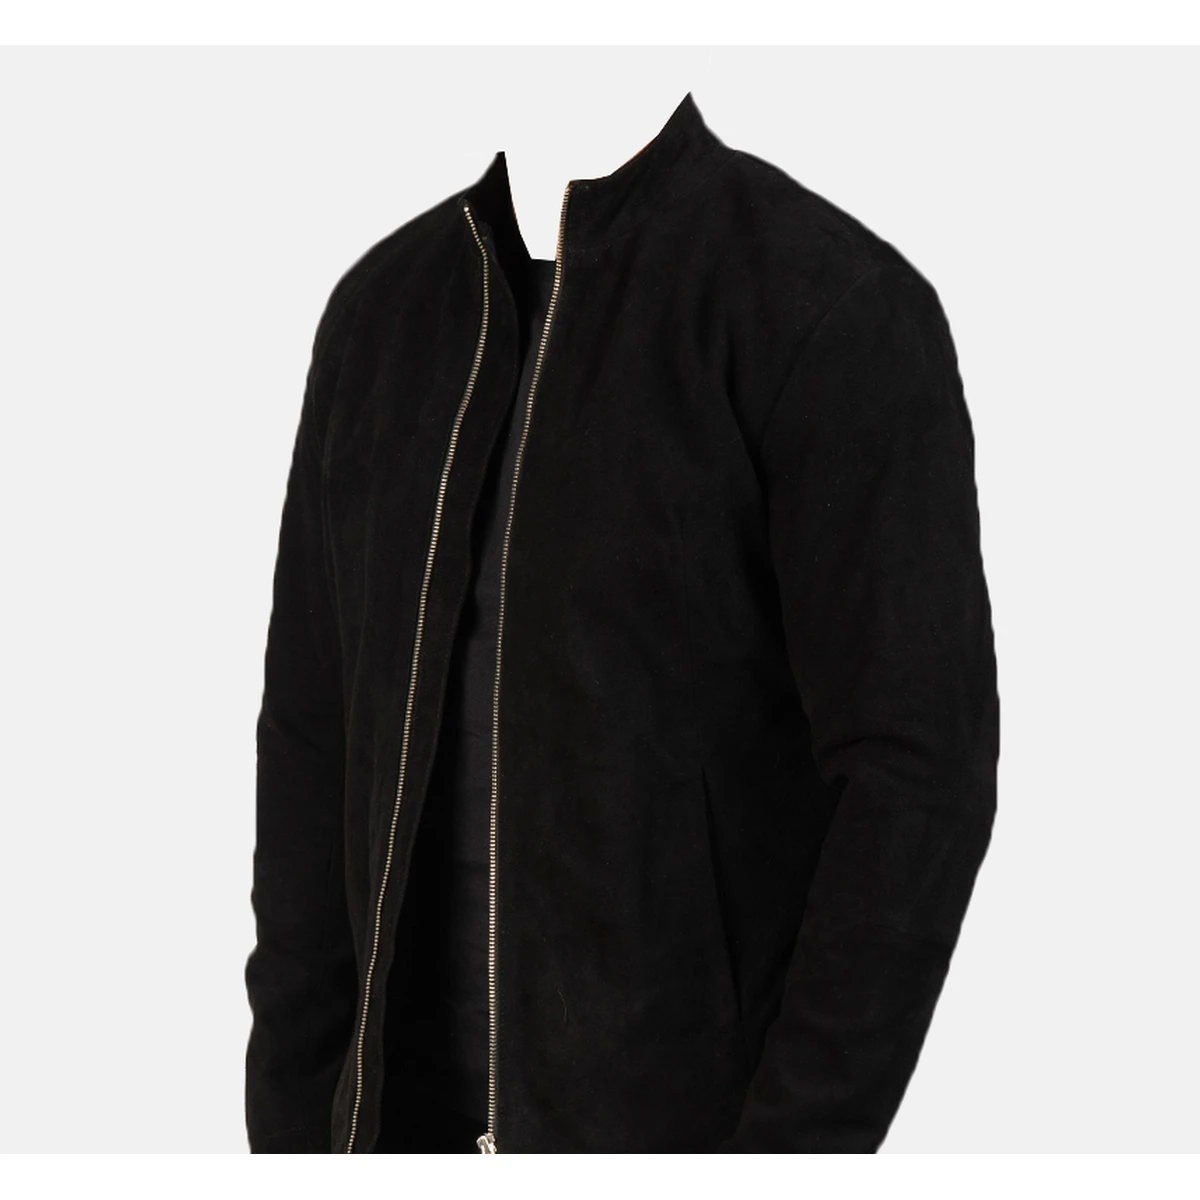 Man High Quality Suede Leather Jackets 